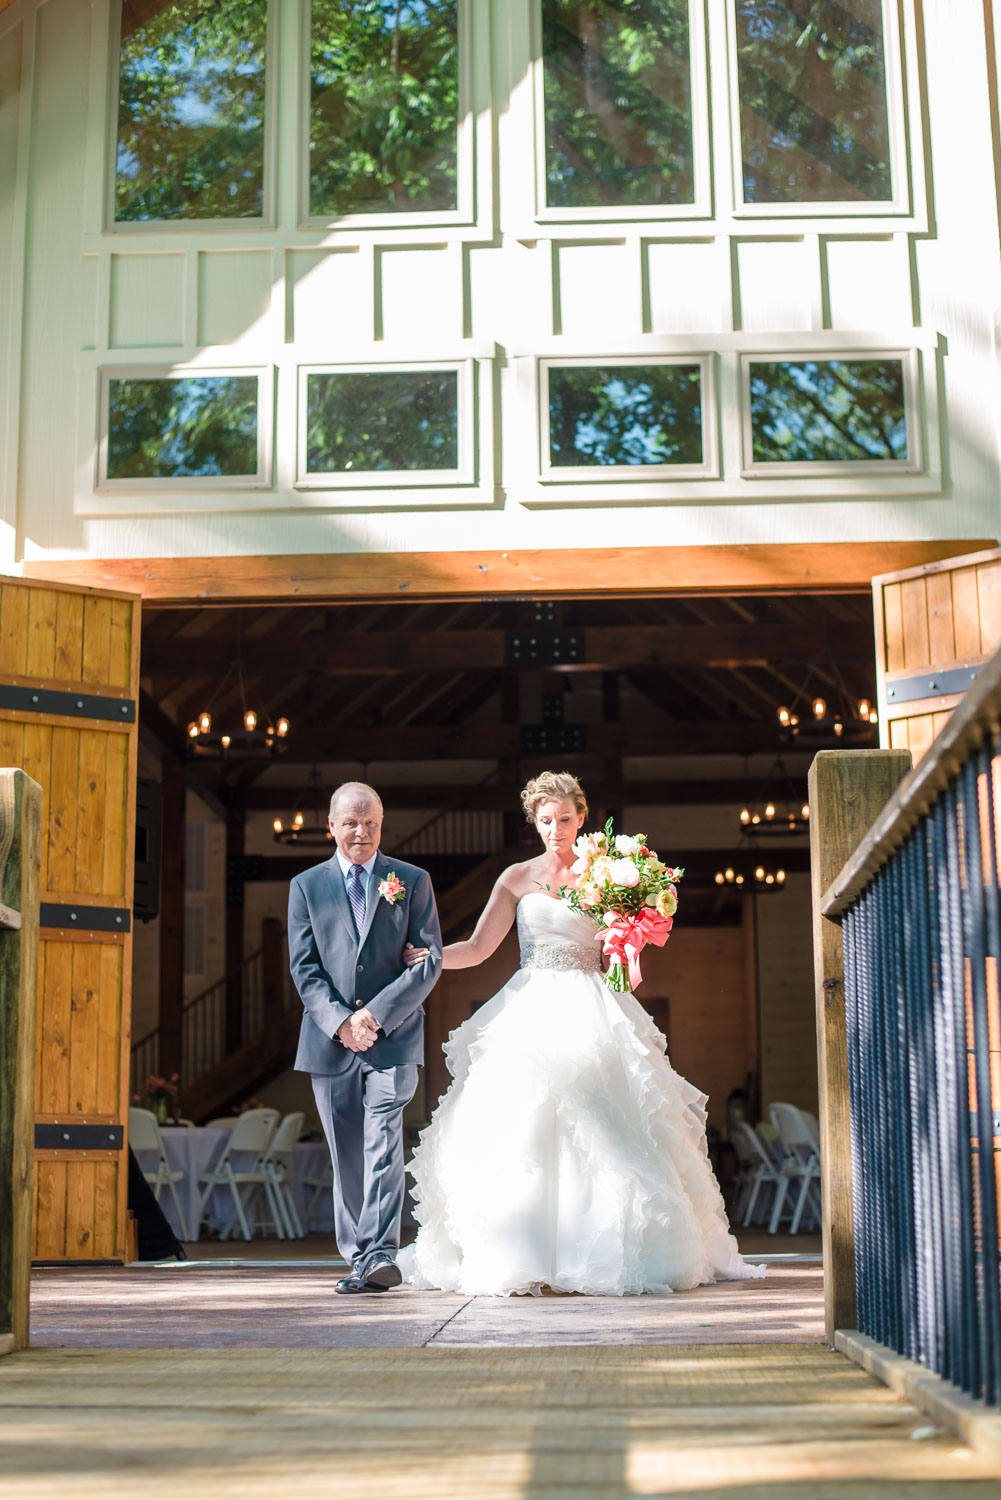 dad walking bride out of the Timber frame event center on her wedding day